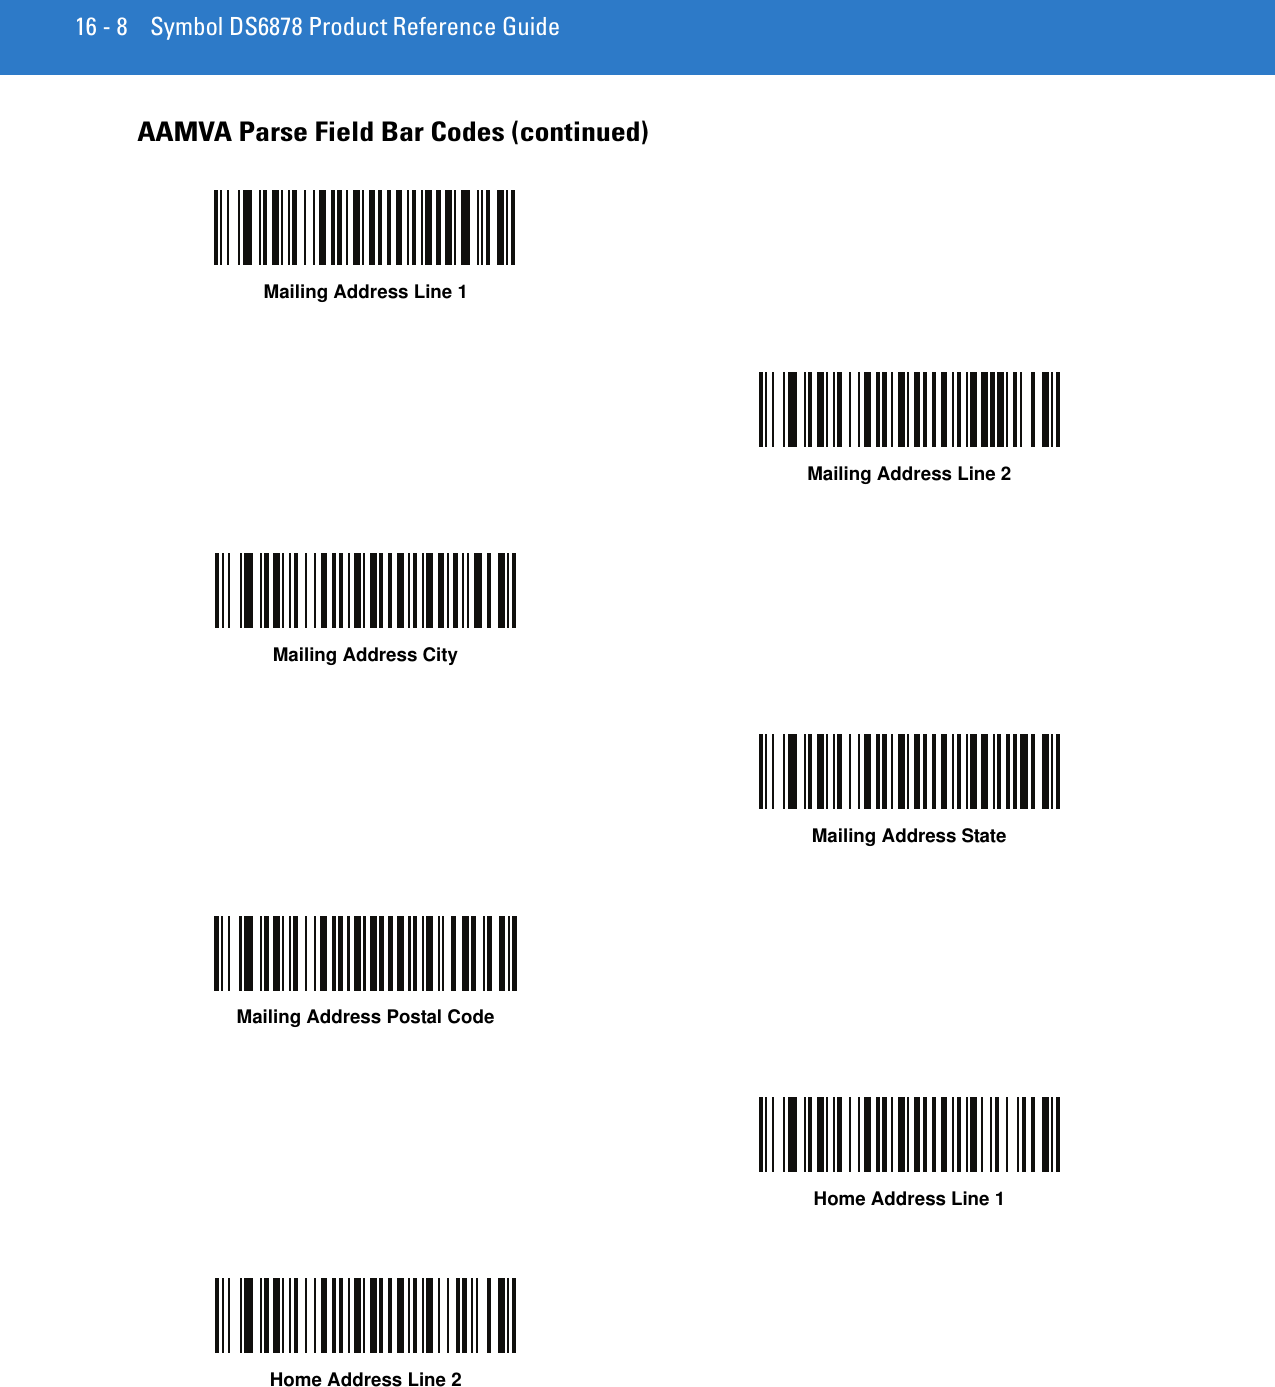 16 - 8 Symbol DS6878 Product Reference GuideAAMVA Parse Field Bar Codes (continued)Mailing Address Line 1Mailing Address Line 2Mailing Address CityMailing Address StateMailing Address Postal CodeHome Address Line 1Home Address Line 2